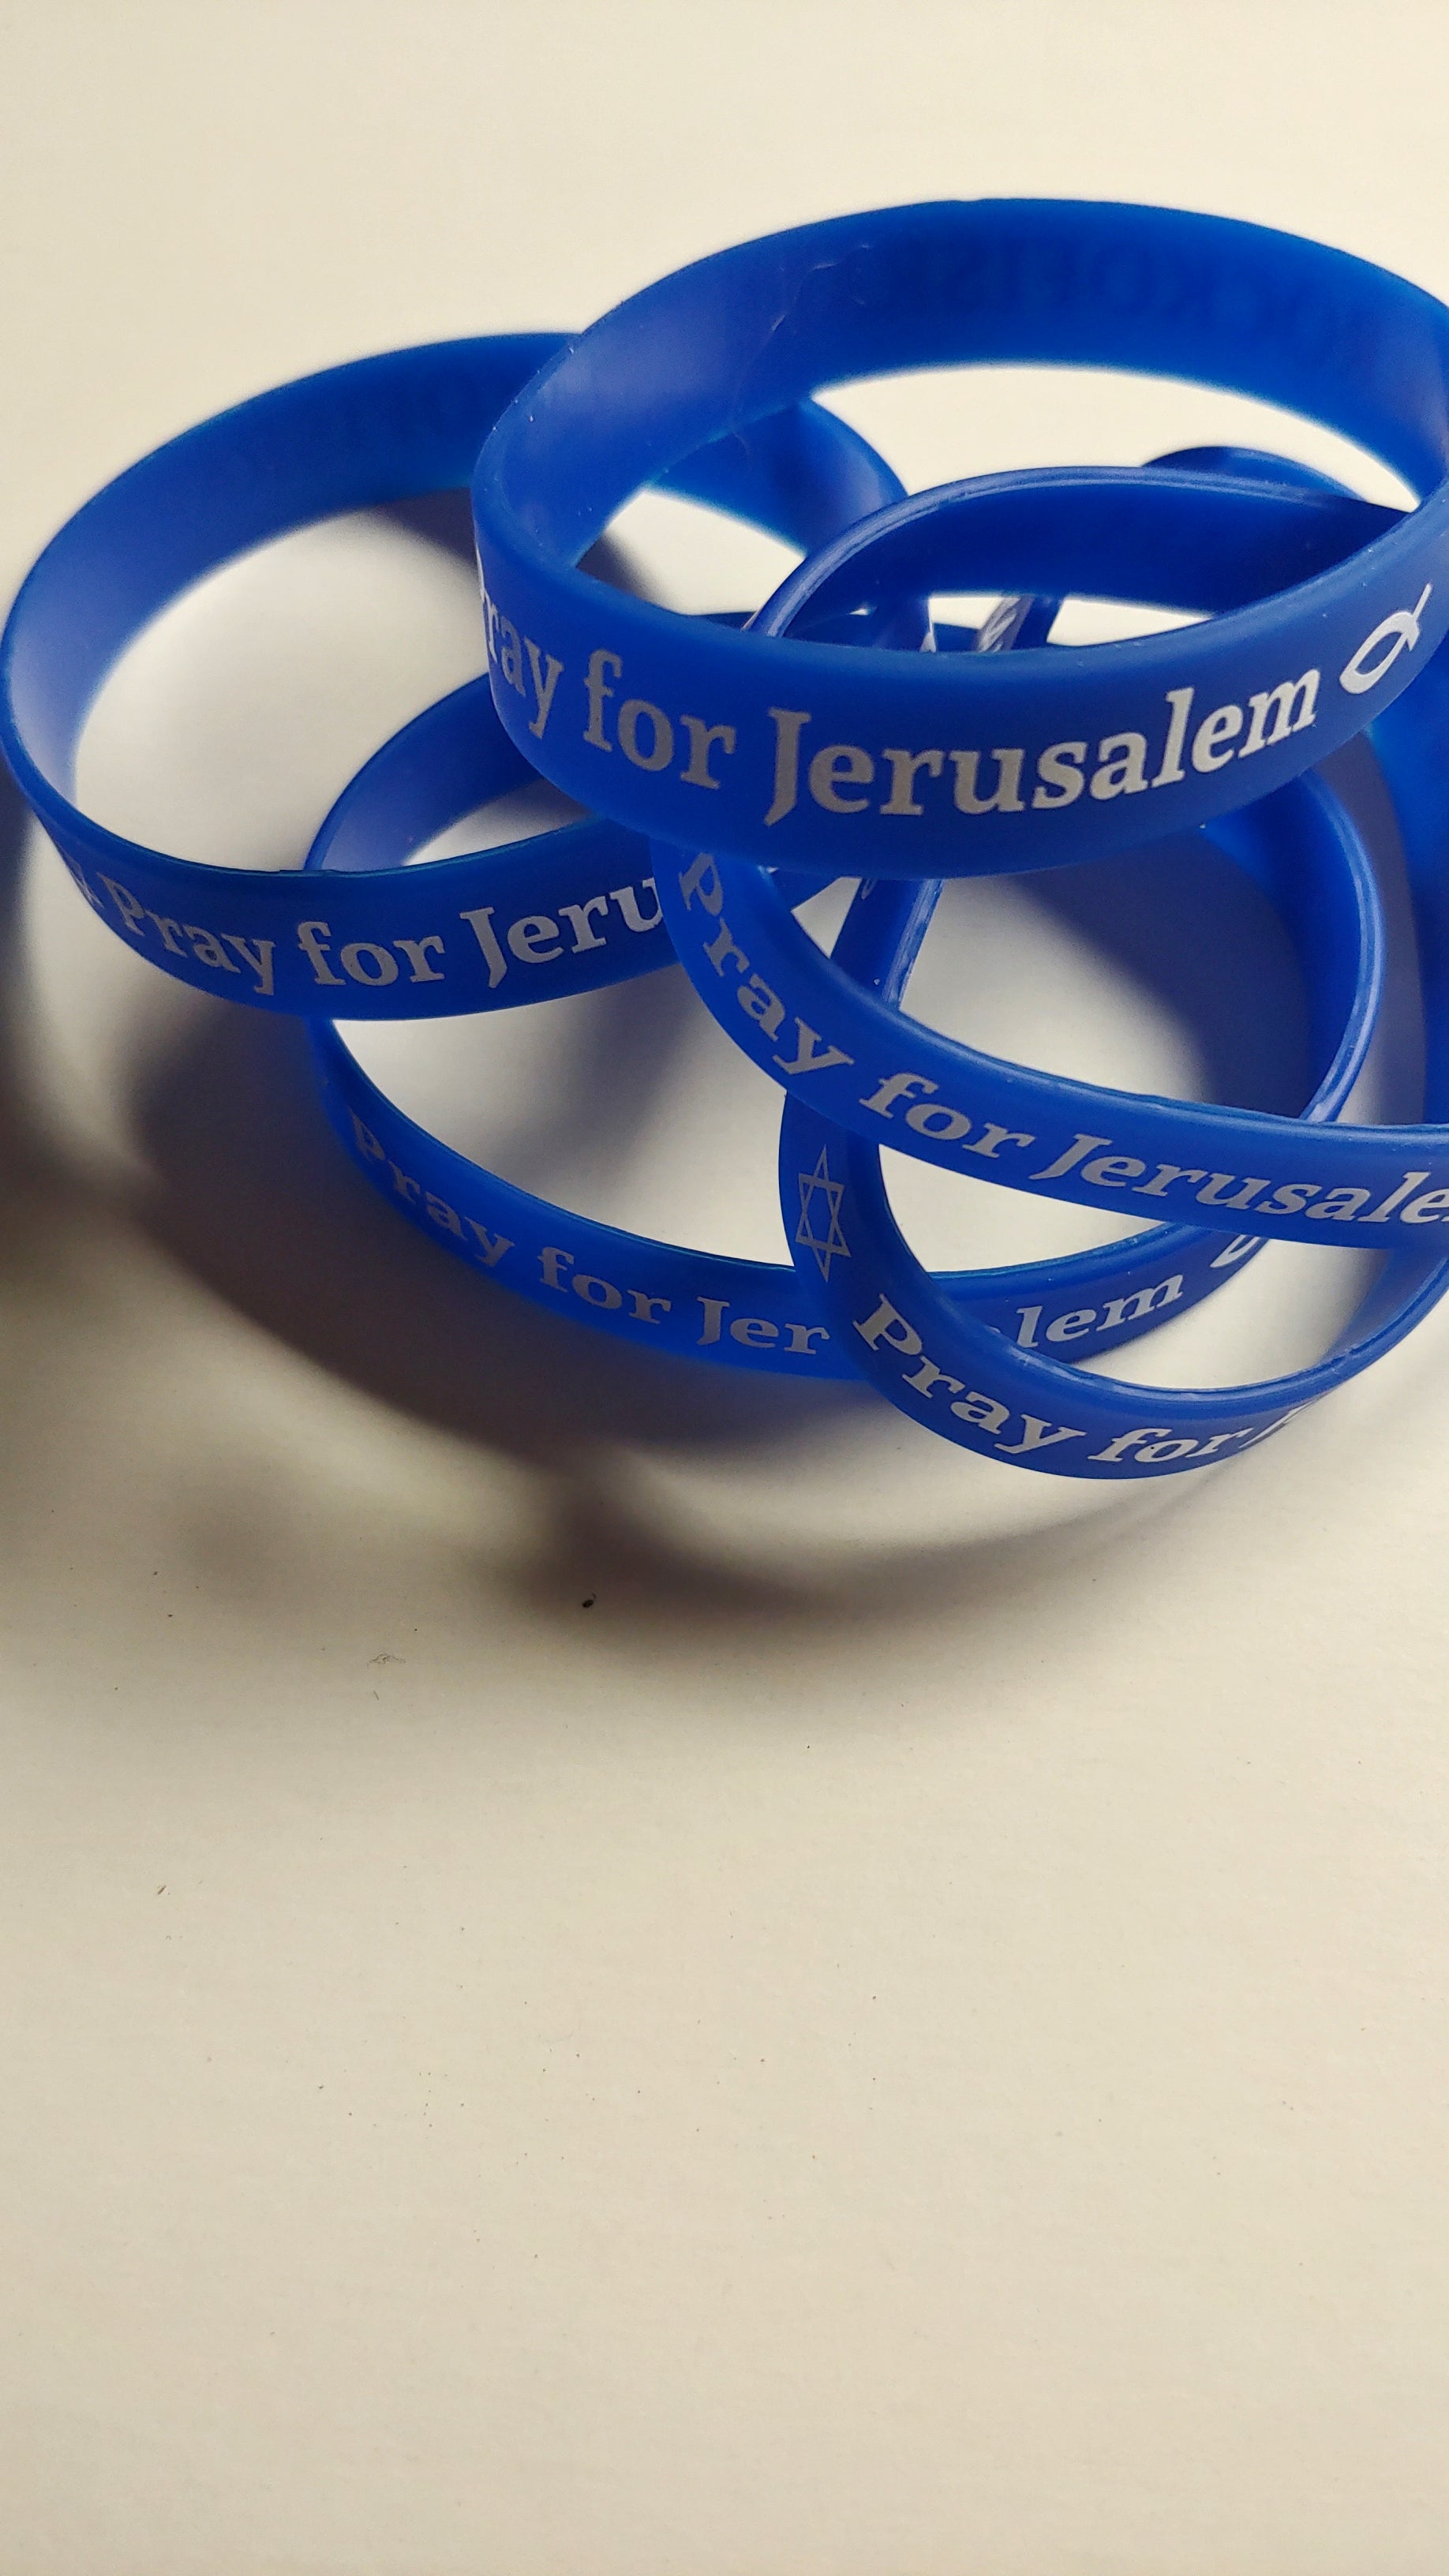 Pray of wristband – Pray / Jerusalem for Rock rubber for Store Israel Israel